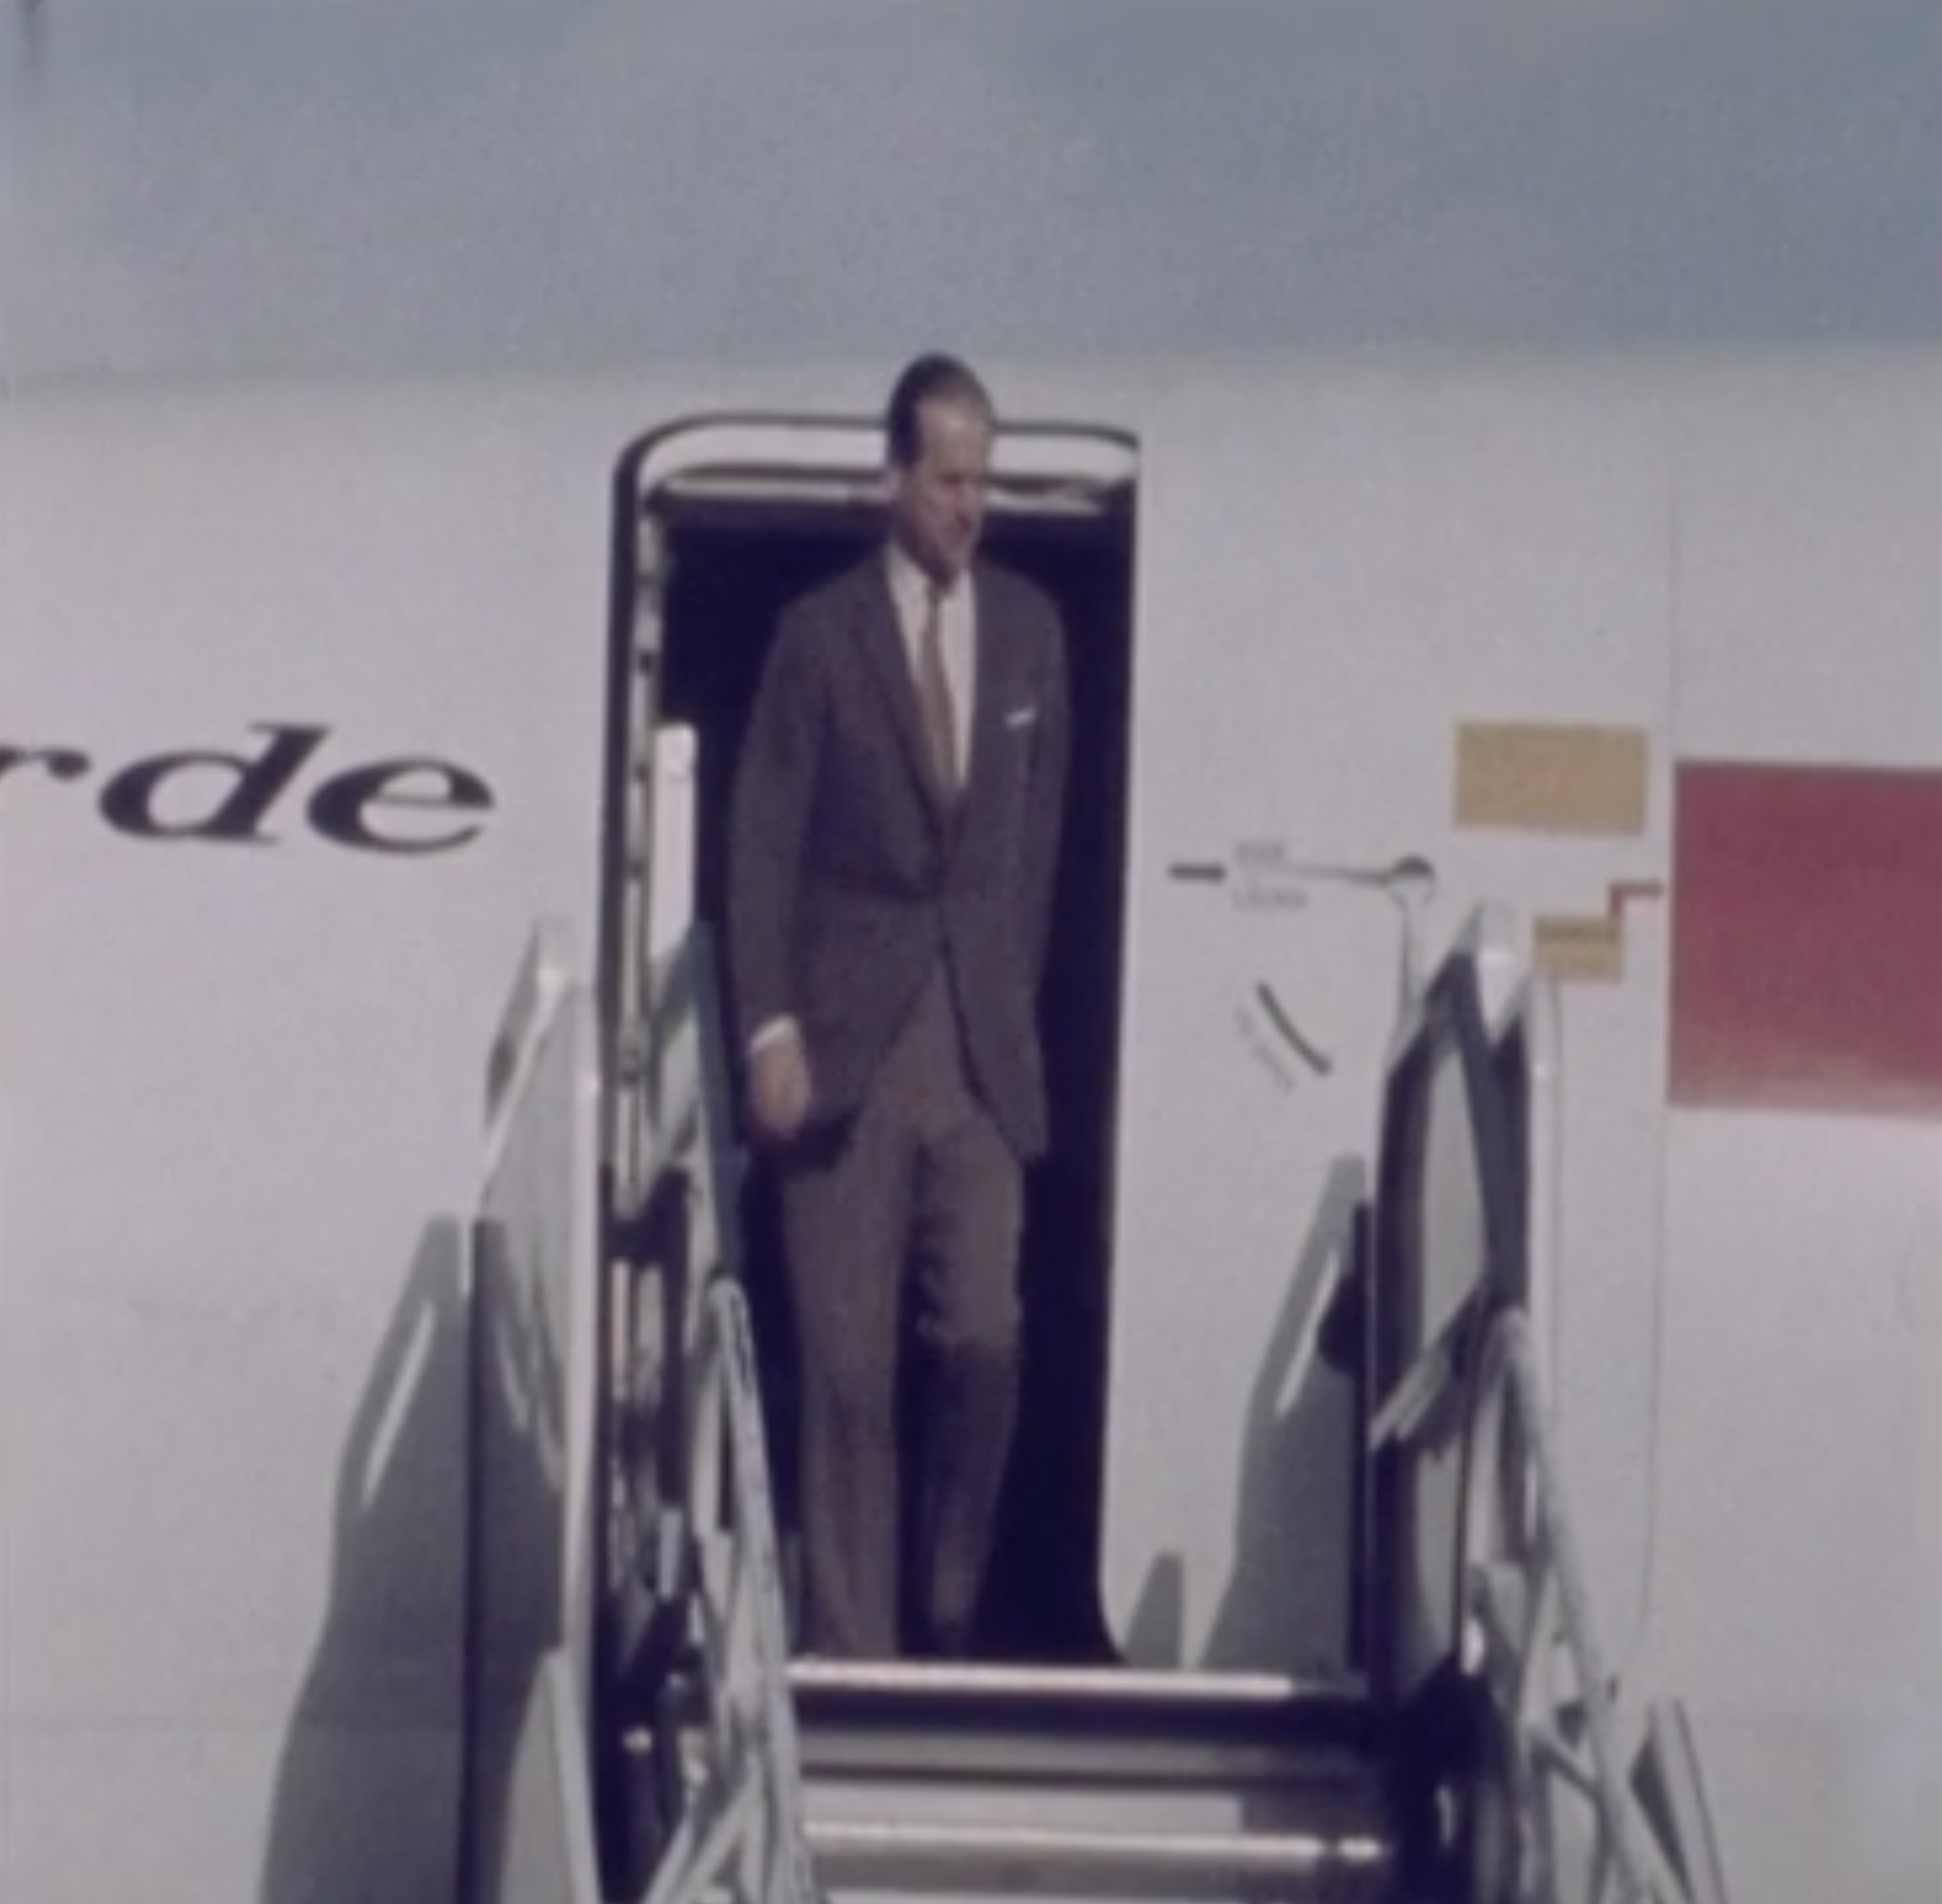 a man in a suit walking out of an airplane